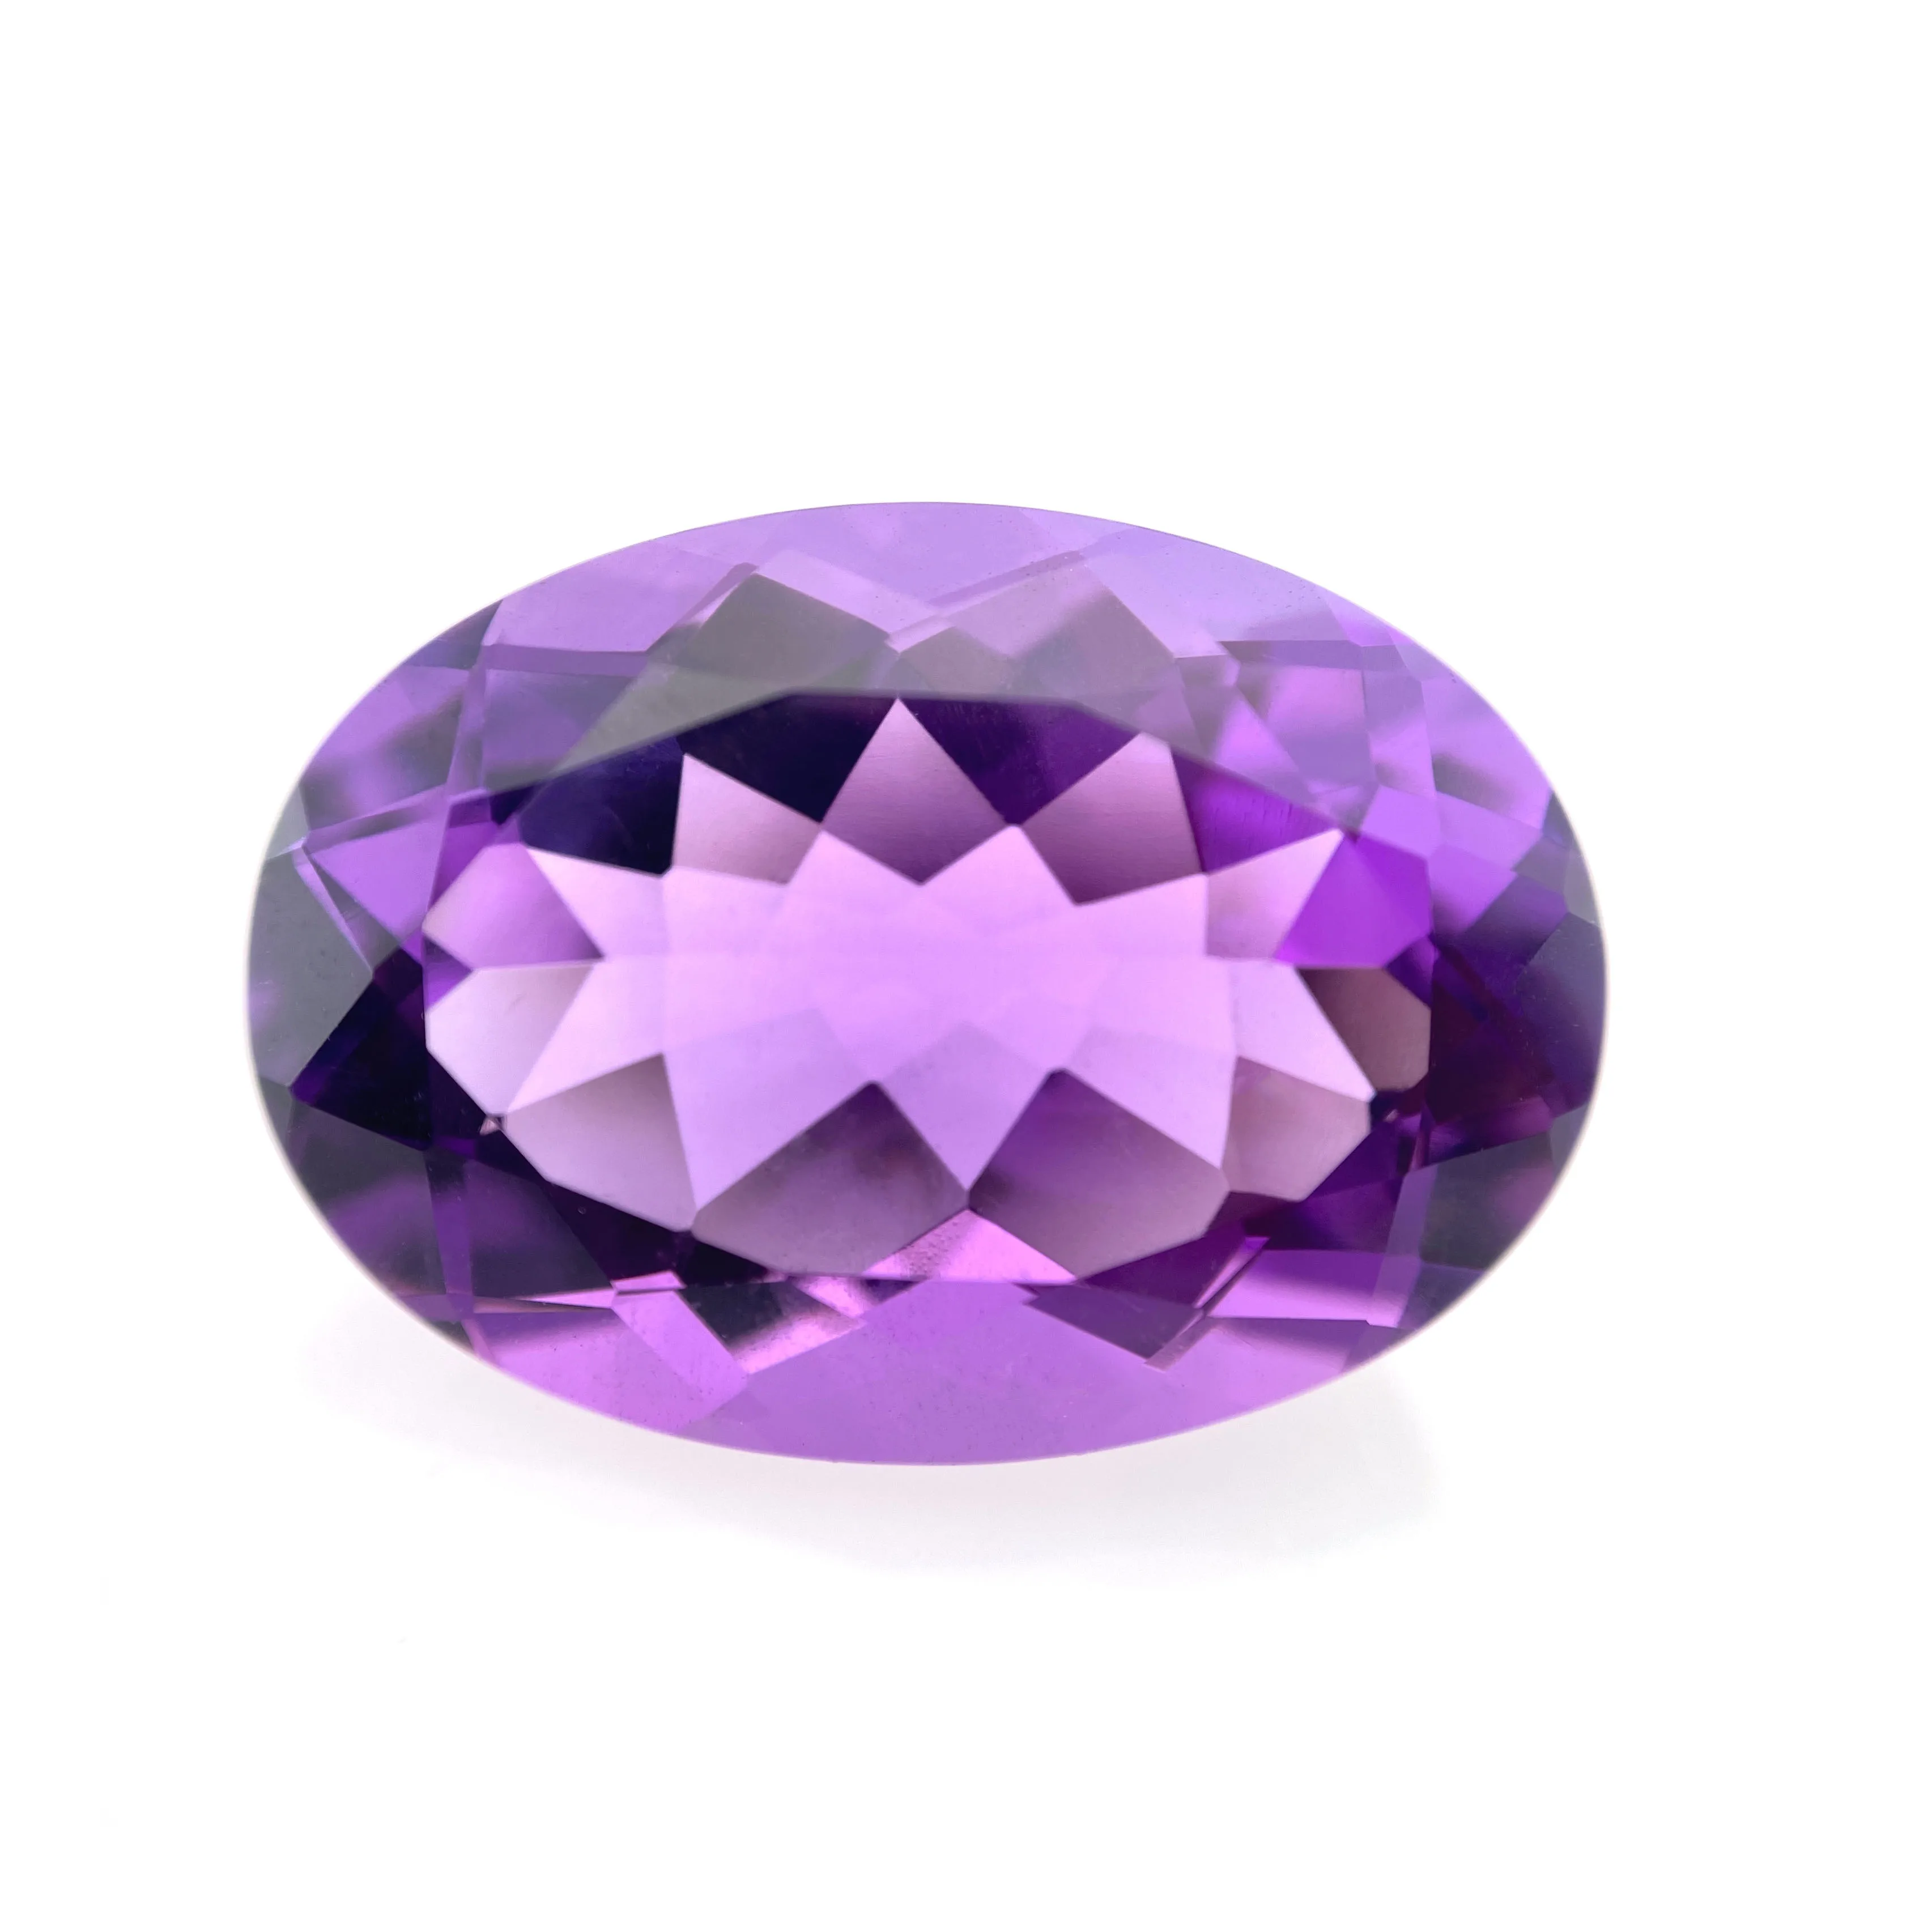 Callibrated Stone 9.61 Carats Sparkling Stone Natural Amethyst Normal Concave Cut 16x13 MM Oval Loose Gemstone.